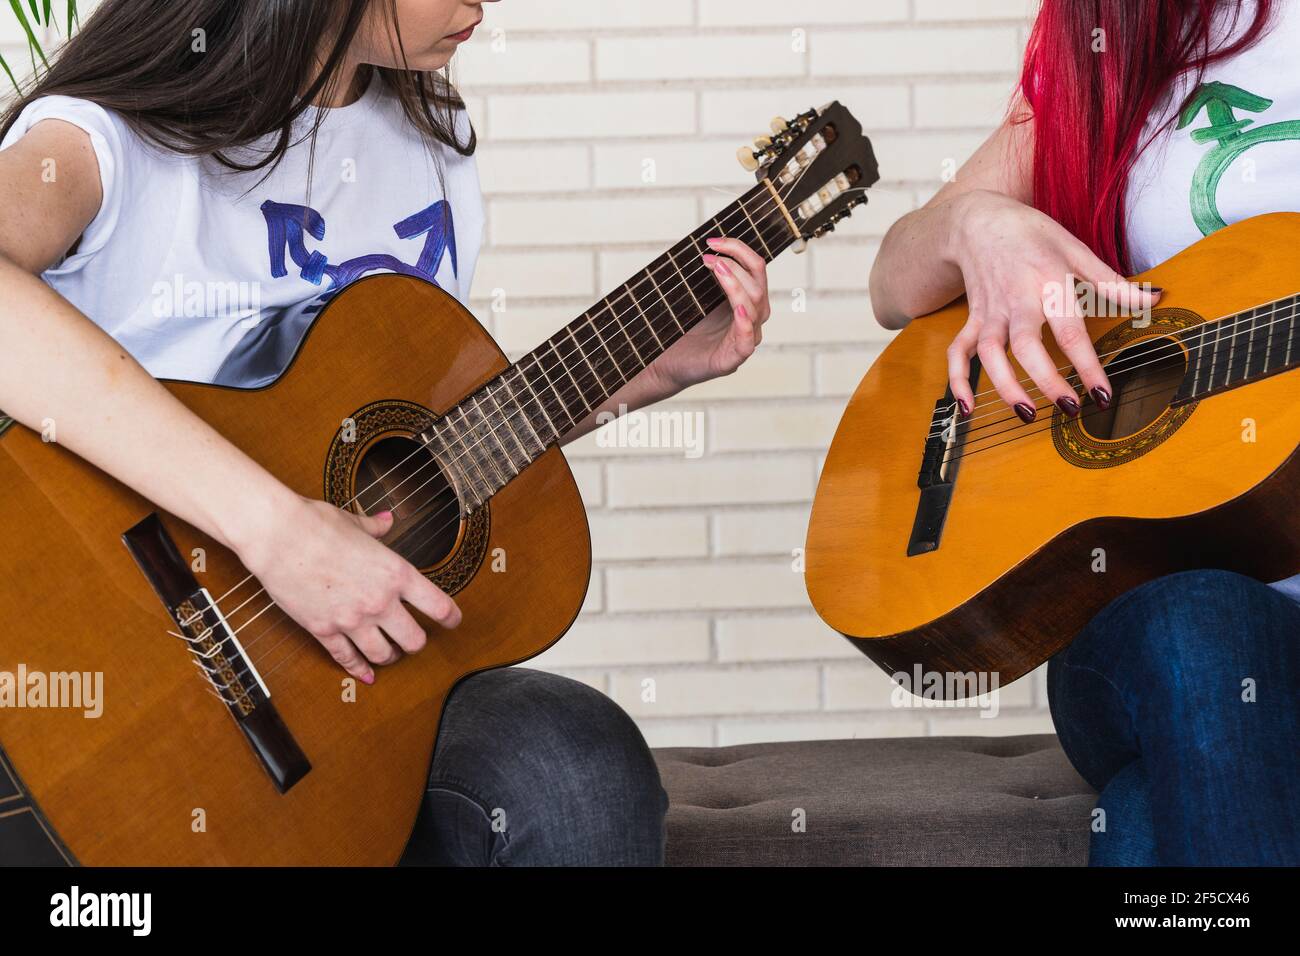 Anonymous girlfriends in t shirts with transgender symbol sitting on bench and playing Spanish guitars together Stock Photo